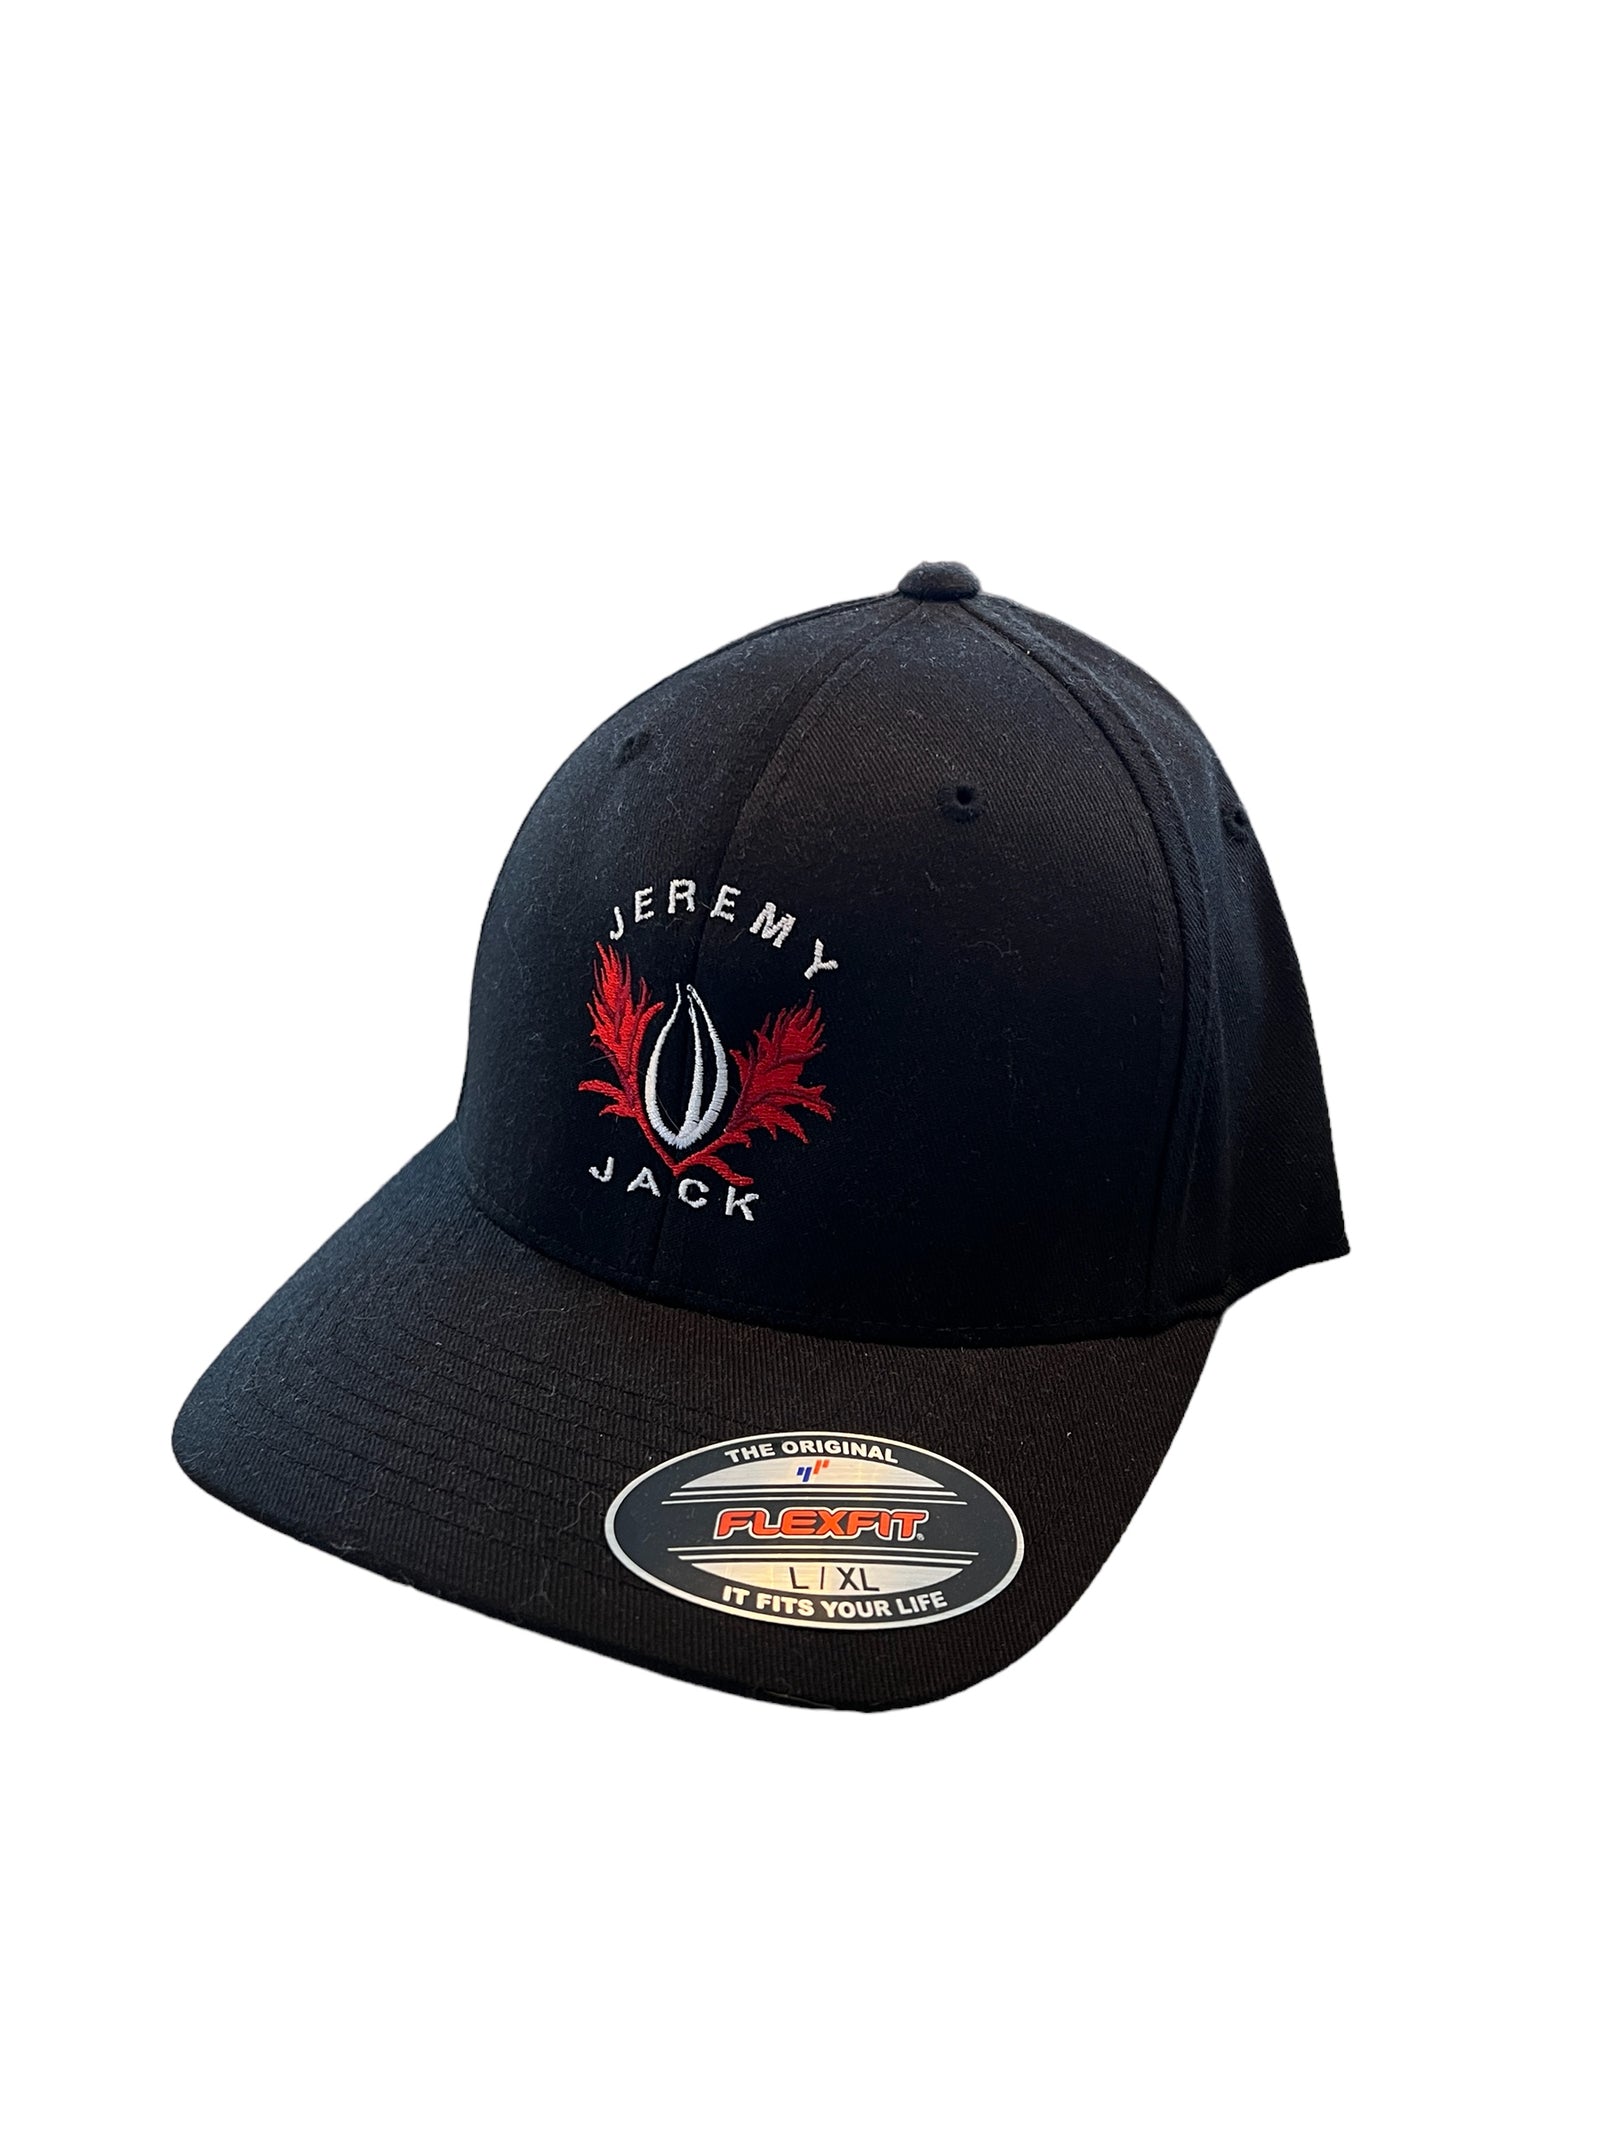 Jeremy Jack Fitted Hat